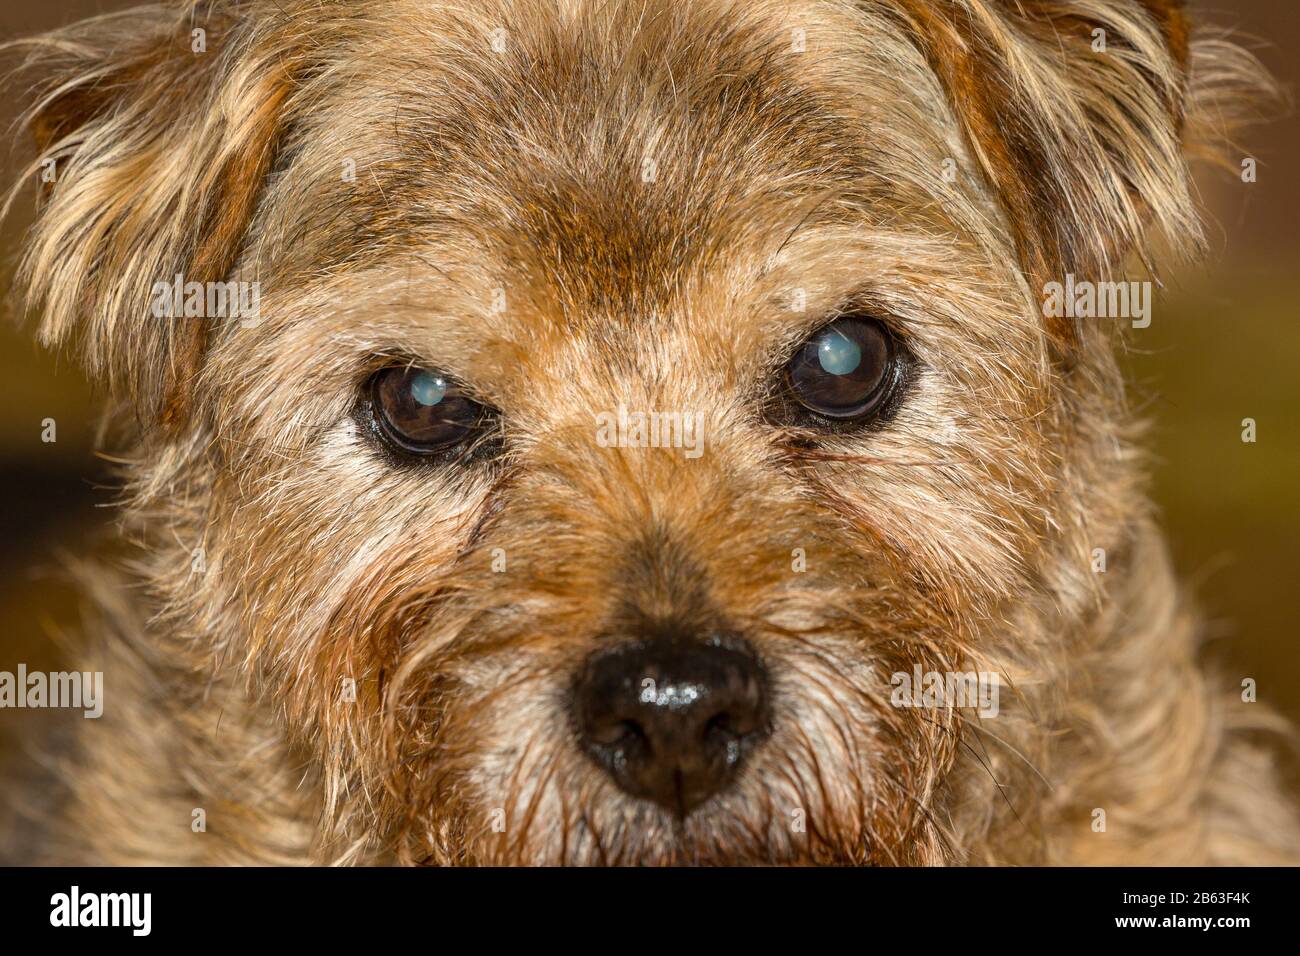 Elderly dog with cataracts. Rosie is a 16 year old terrier. Stock Photo